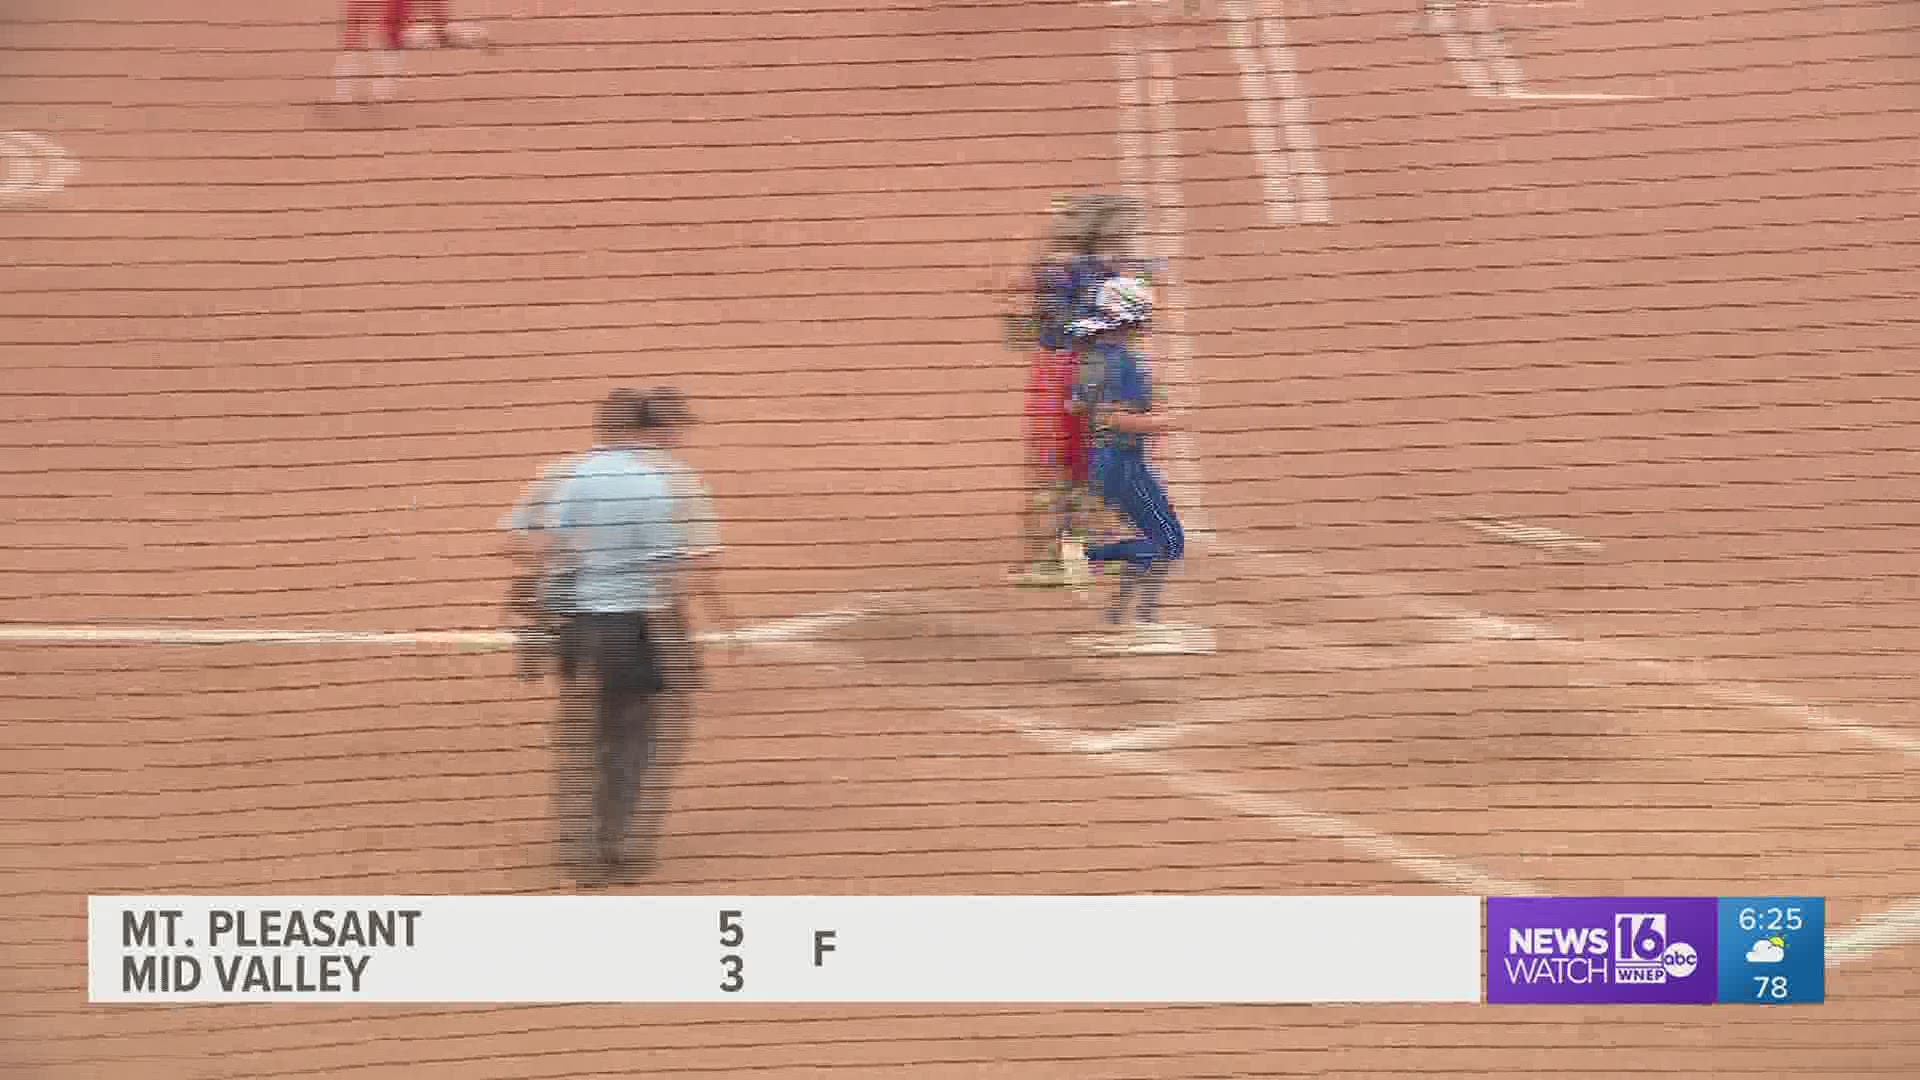 Mid Valley held a 2-0 lead, but Mt. Pleasant rallied to win the 'AAA' HS State softball Championship by a 5-3 score.